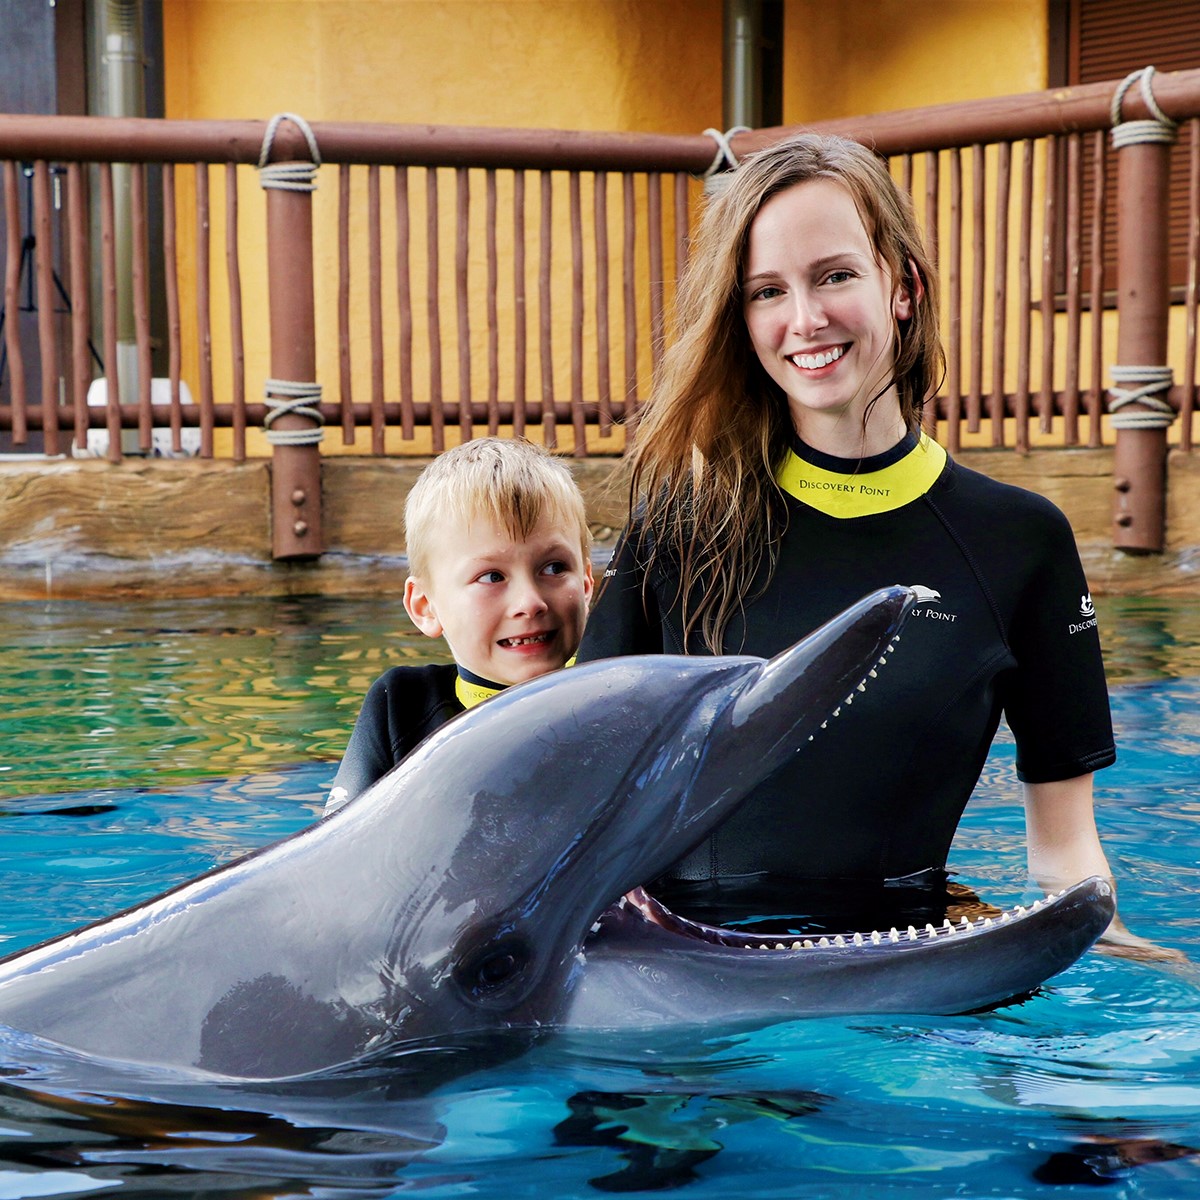 Taylor Bornman lsus computer science student poses with her son blond child and dolphin in a pool